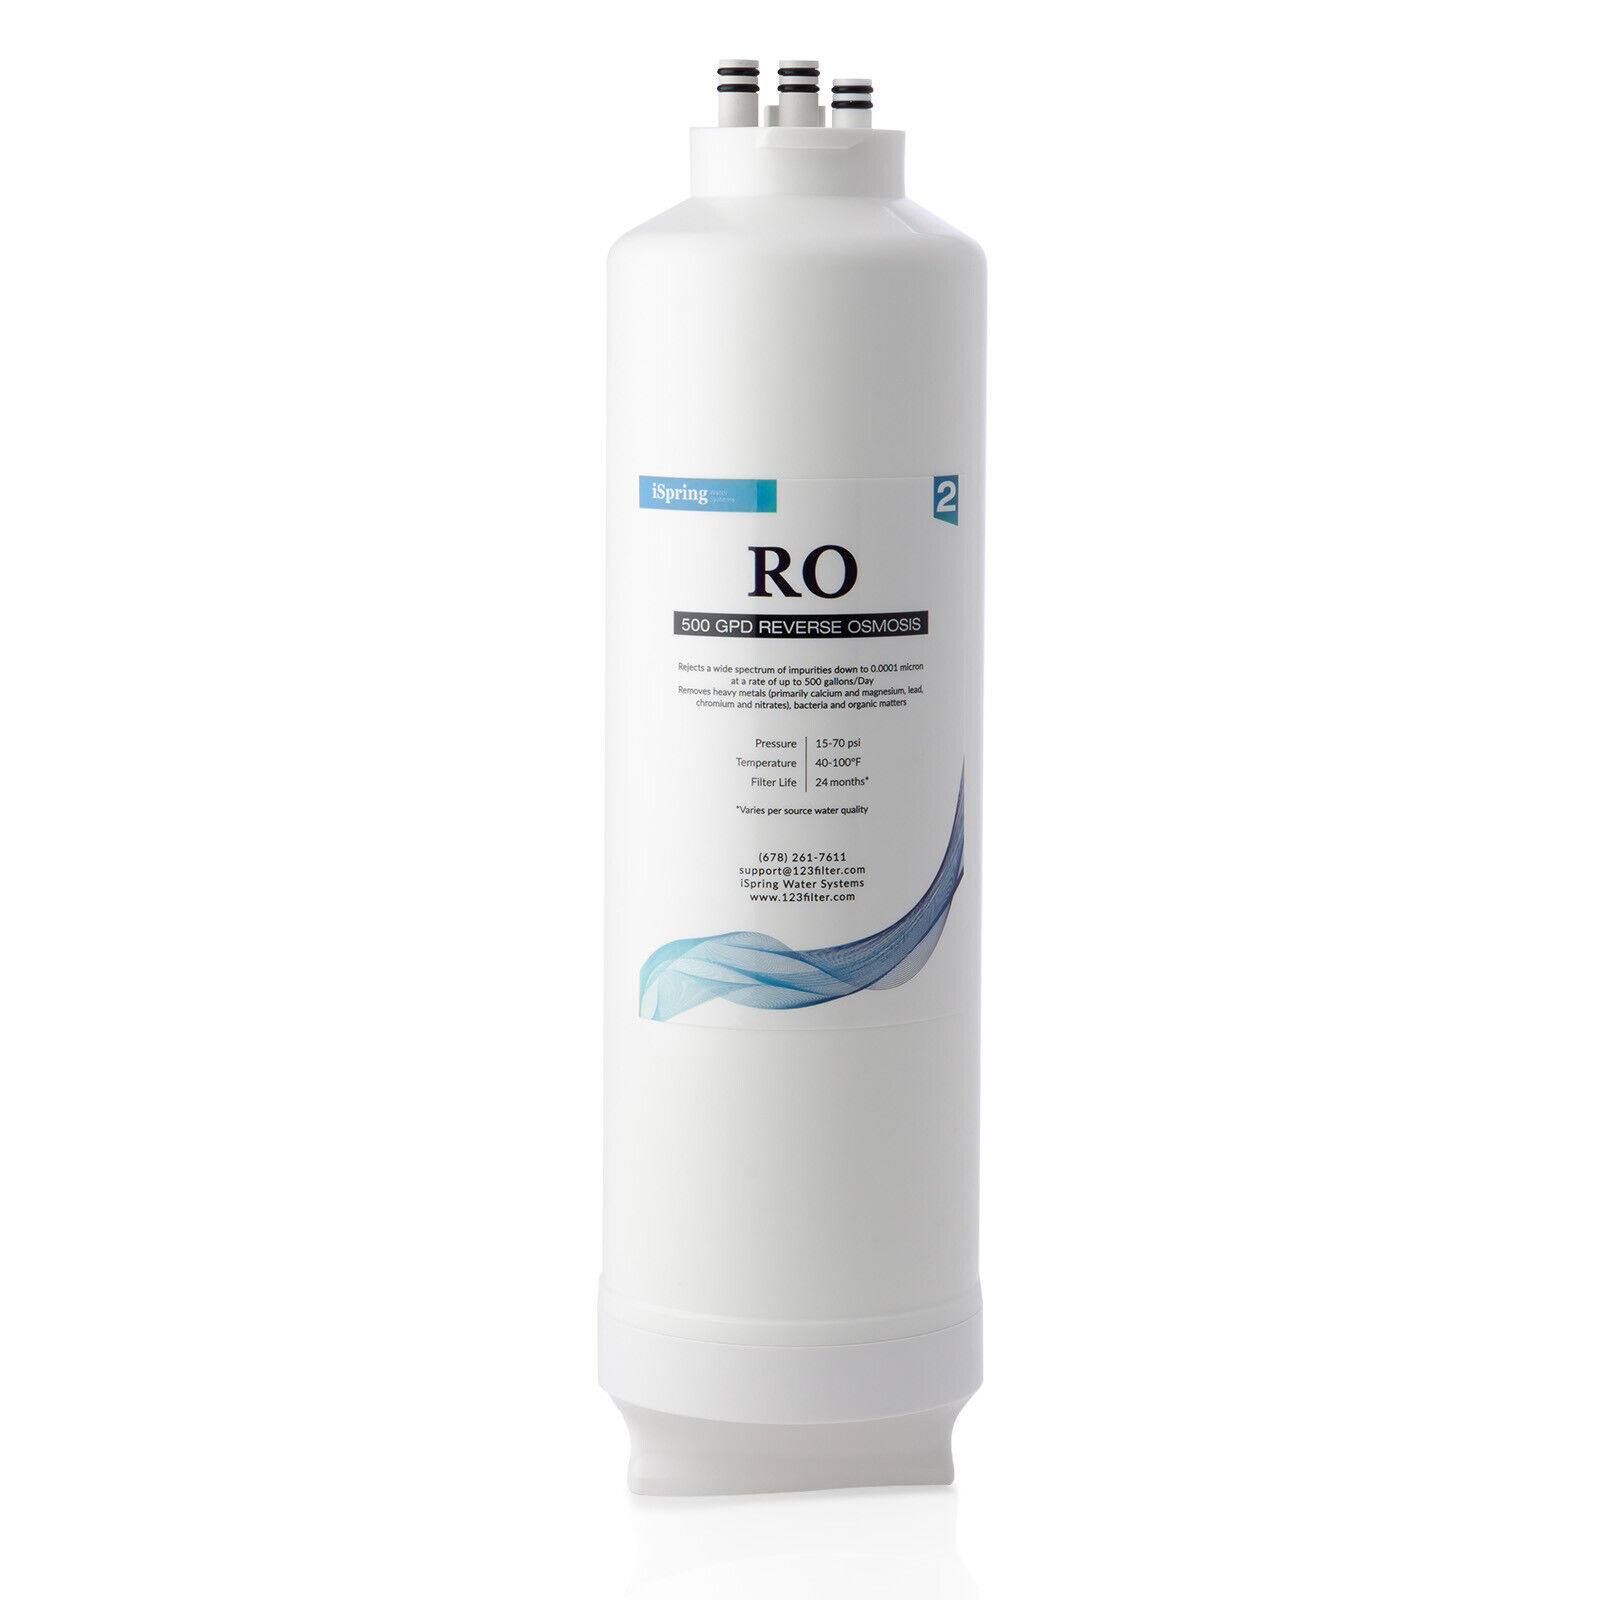 iSpring MRO500 RO Branded goods Now free shipping Membrane Replacement RO500 Tankless for Reverse Osmosis